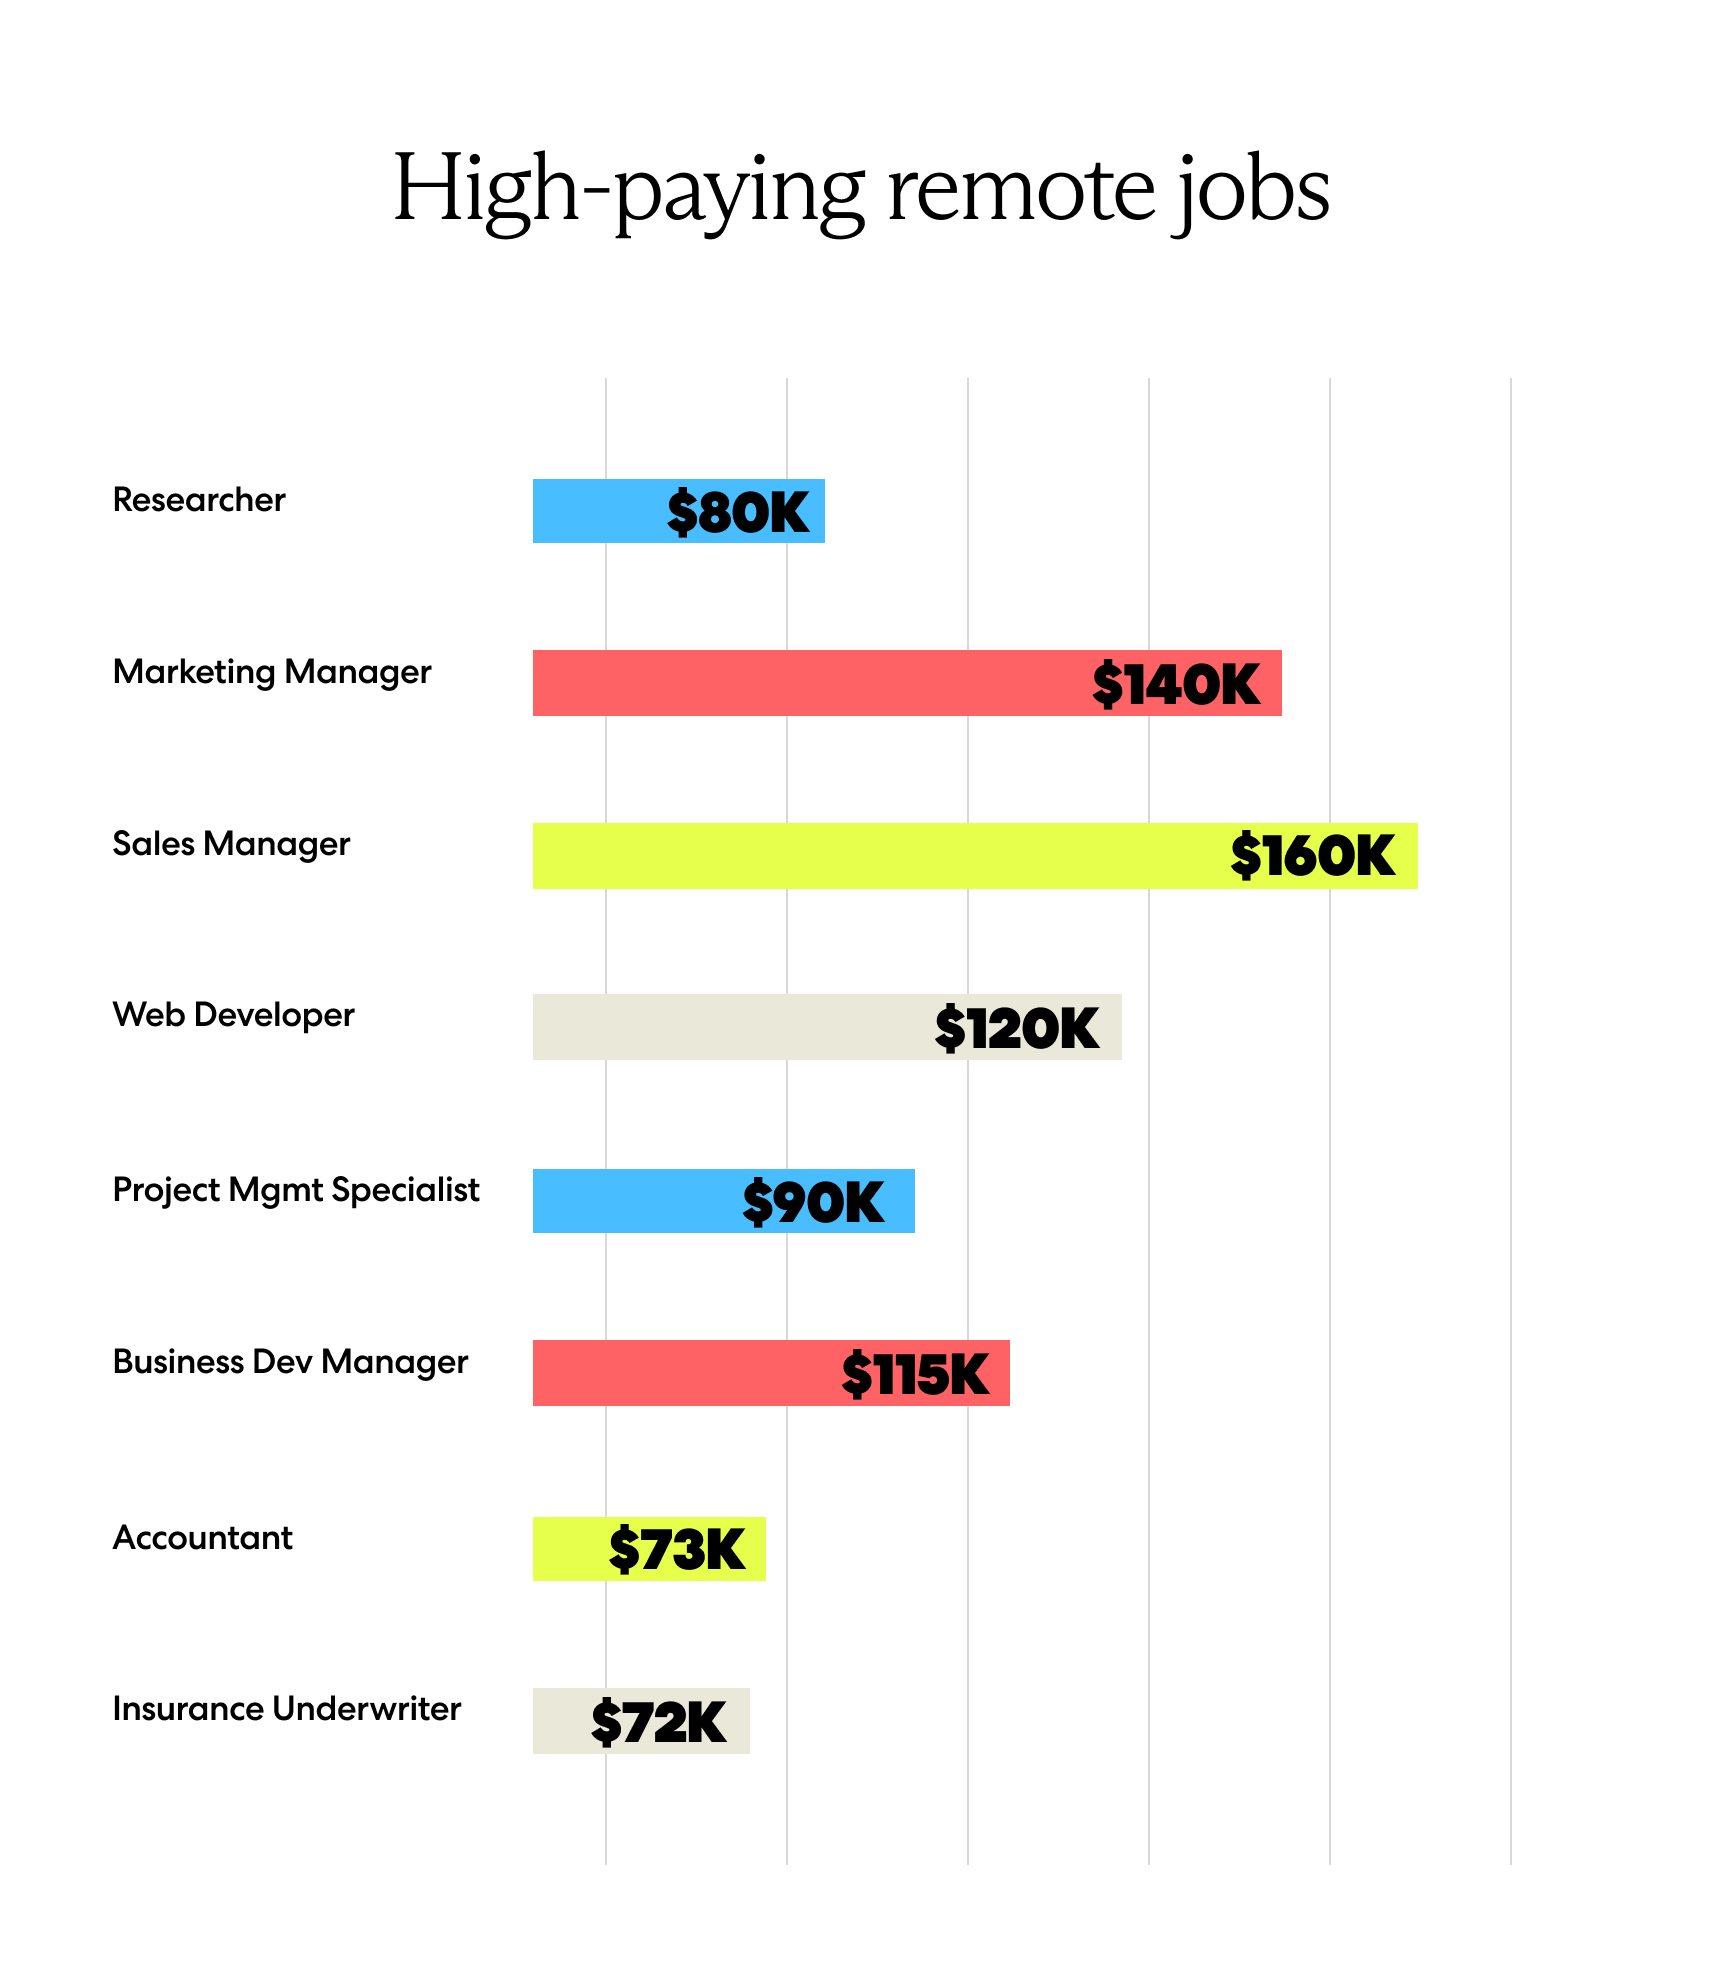 Chart illustrating high-paying remote jobs. Jobs include researcher, marketing manager, sales manager, web developer, project mgmt specialist, business dev manager, accountant and insurance underwriter. 